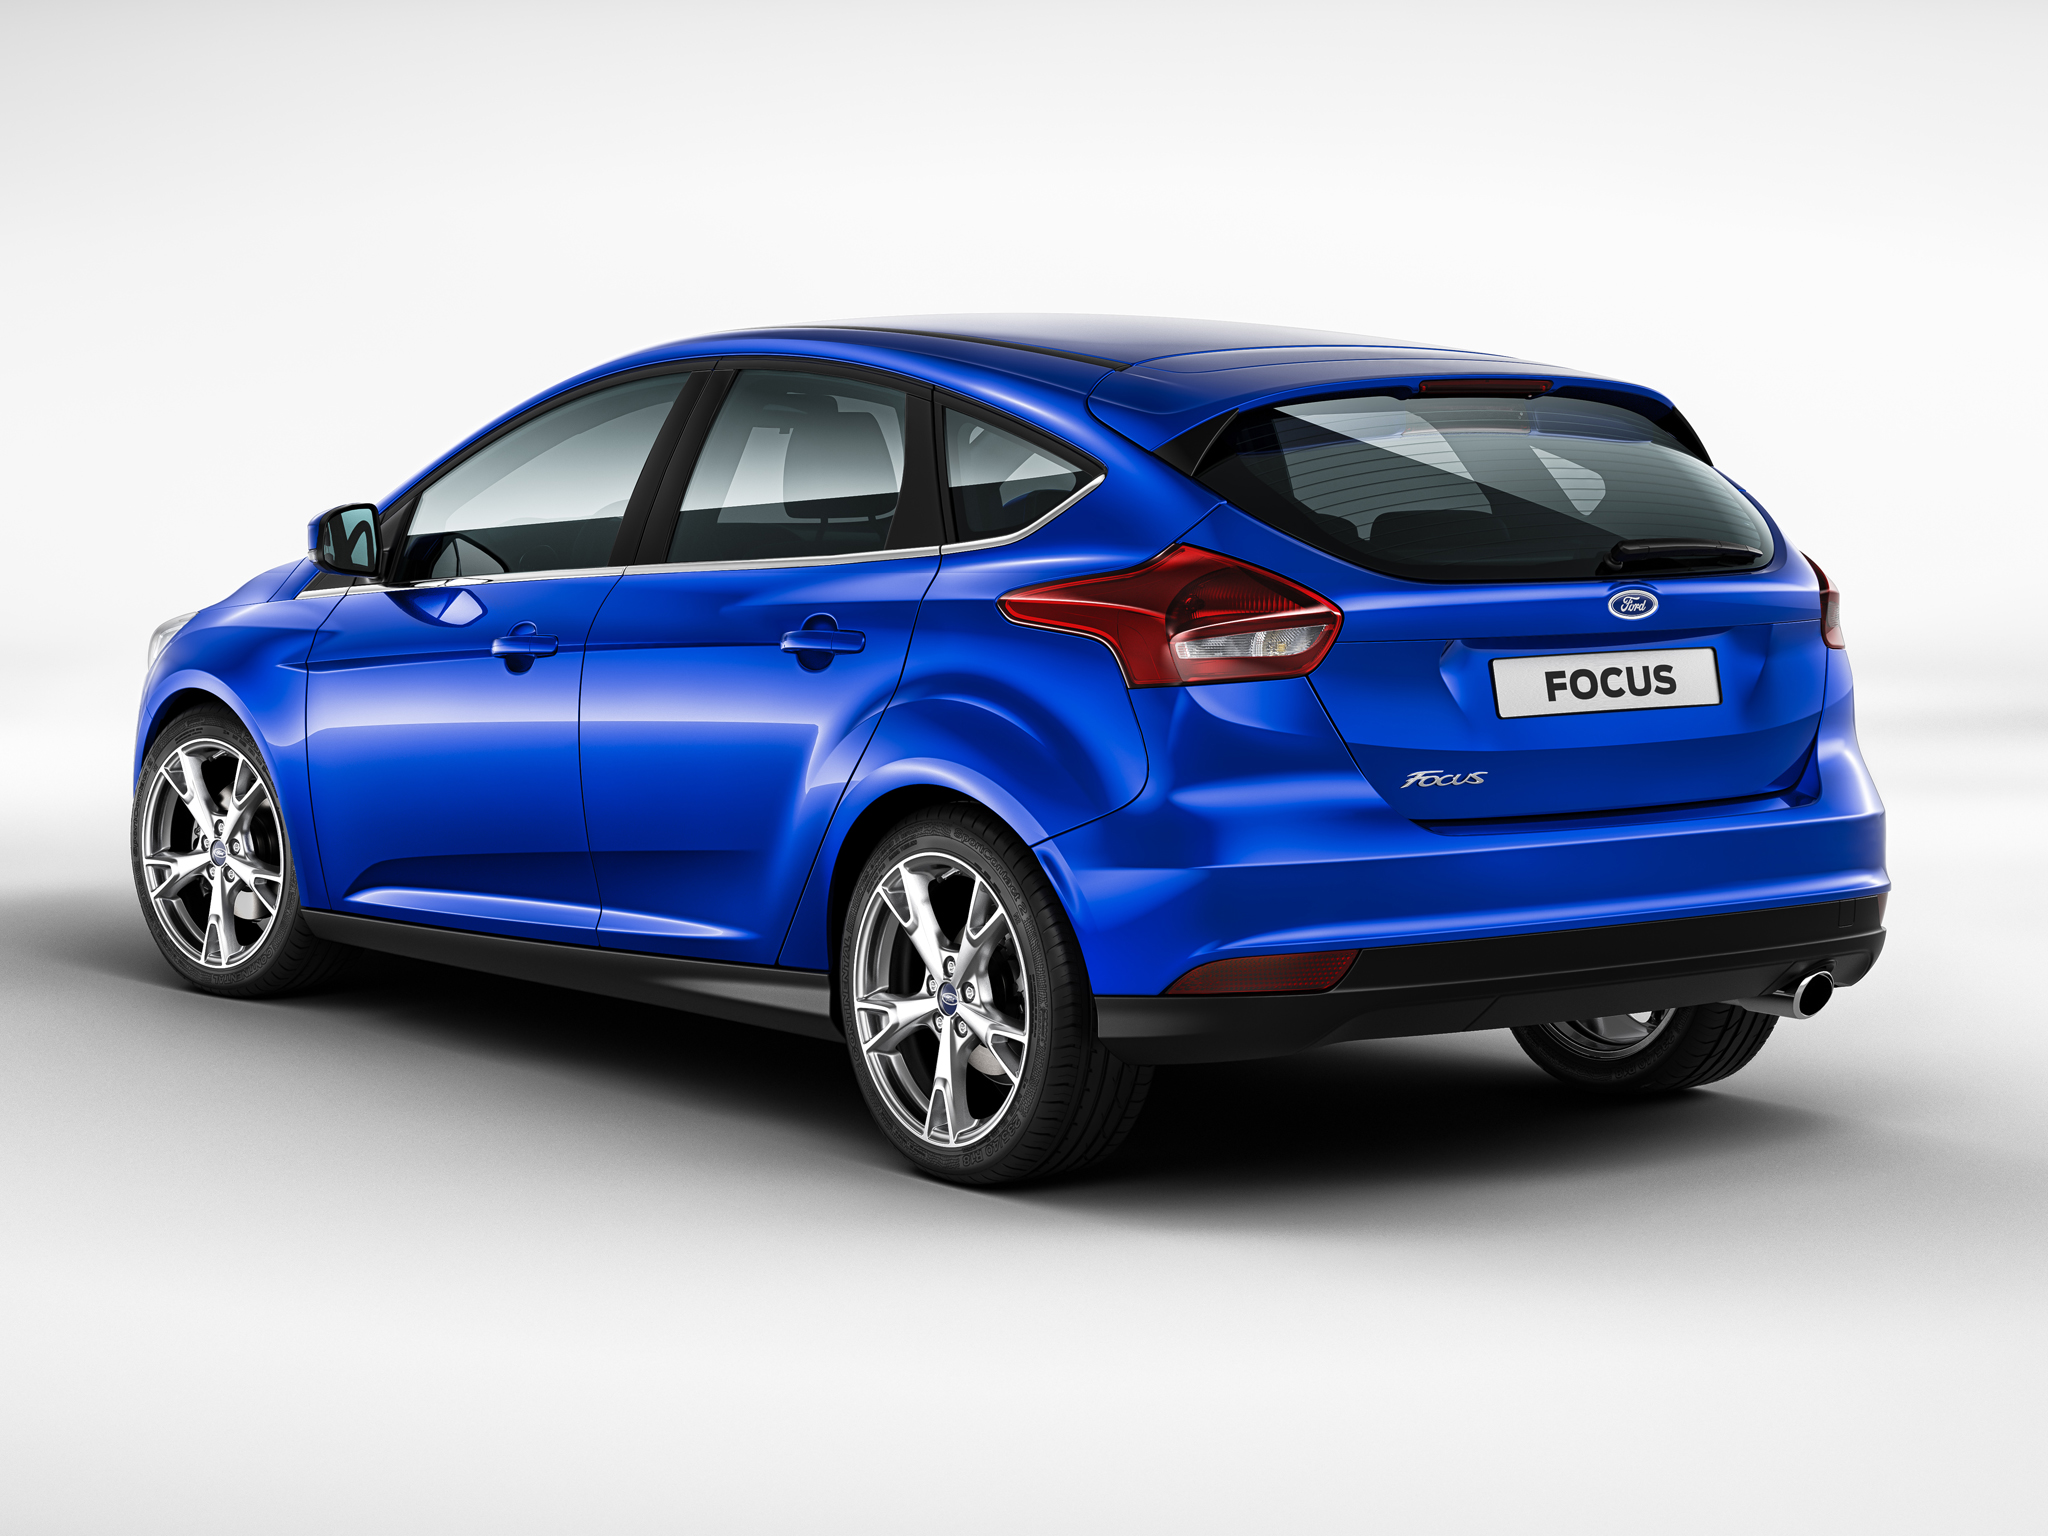 2014 Ford Focus Facelift Hatchback: First Official Photos Leaked ...